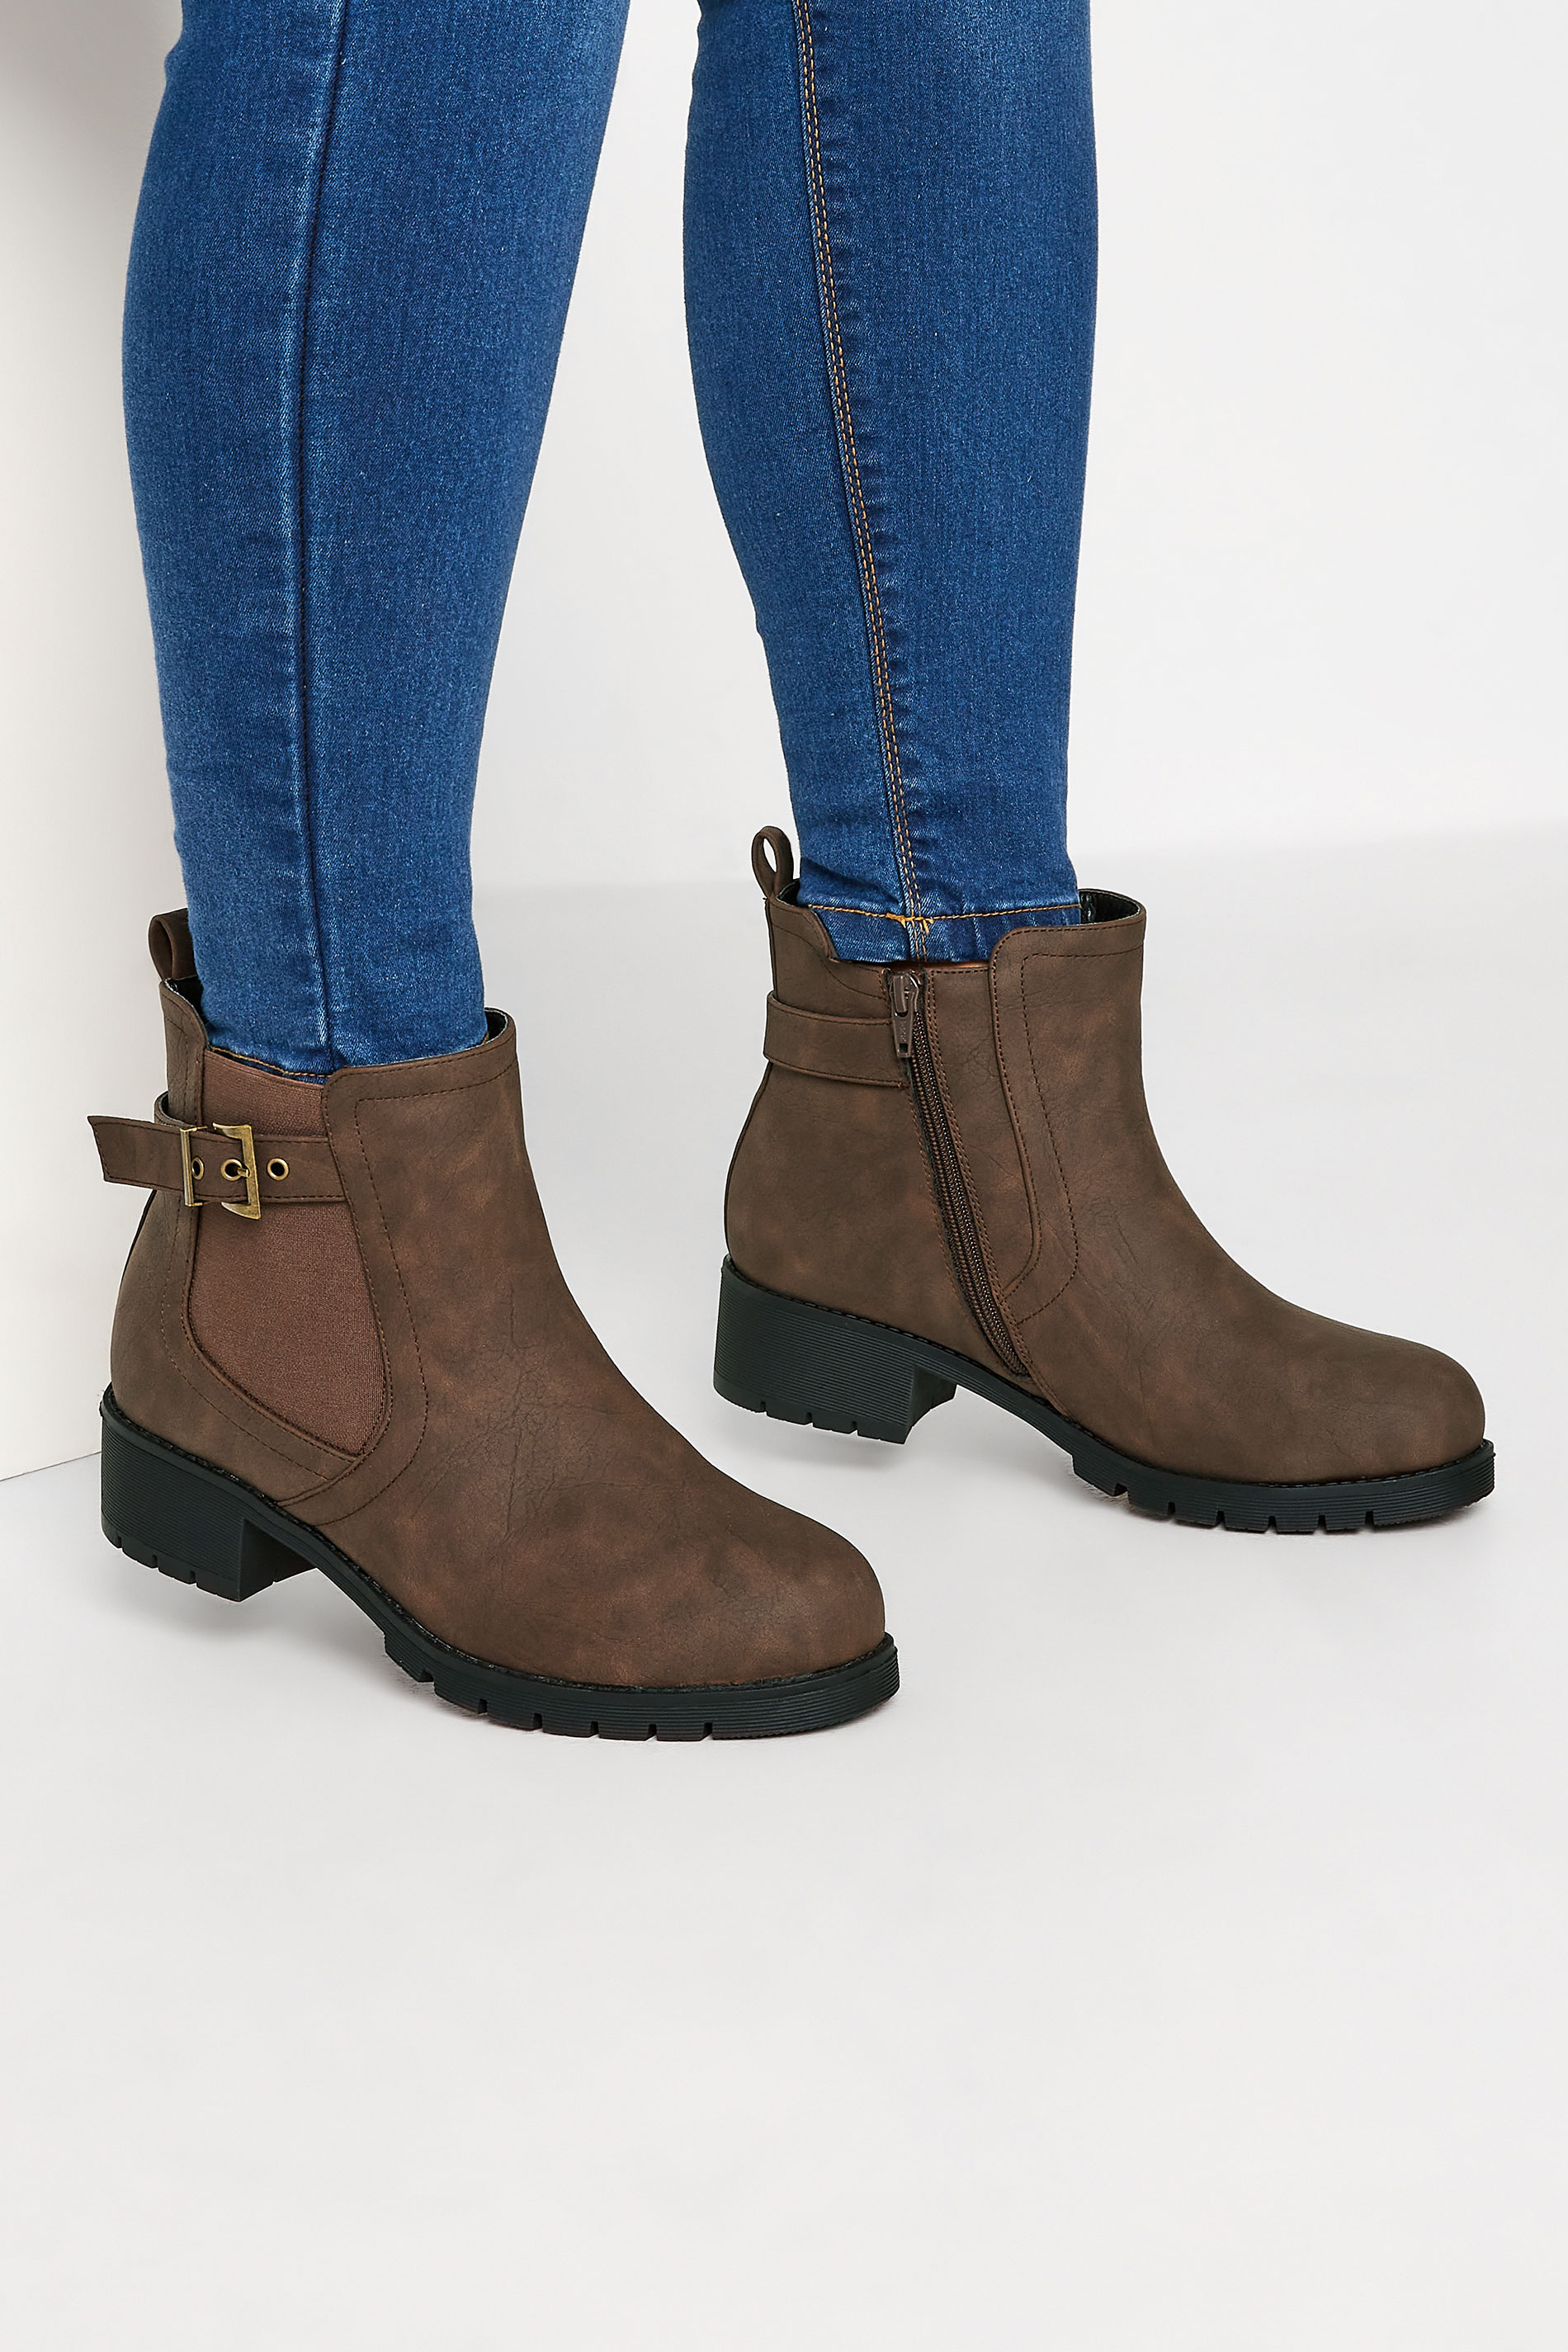 Brown Buckle Ankle Boots In Extra Wide EEE Fit 1